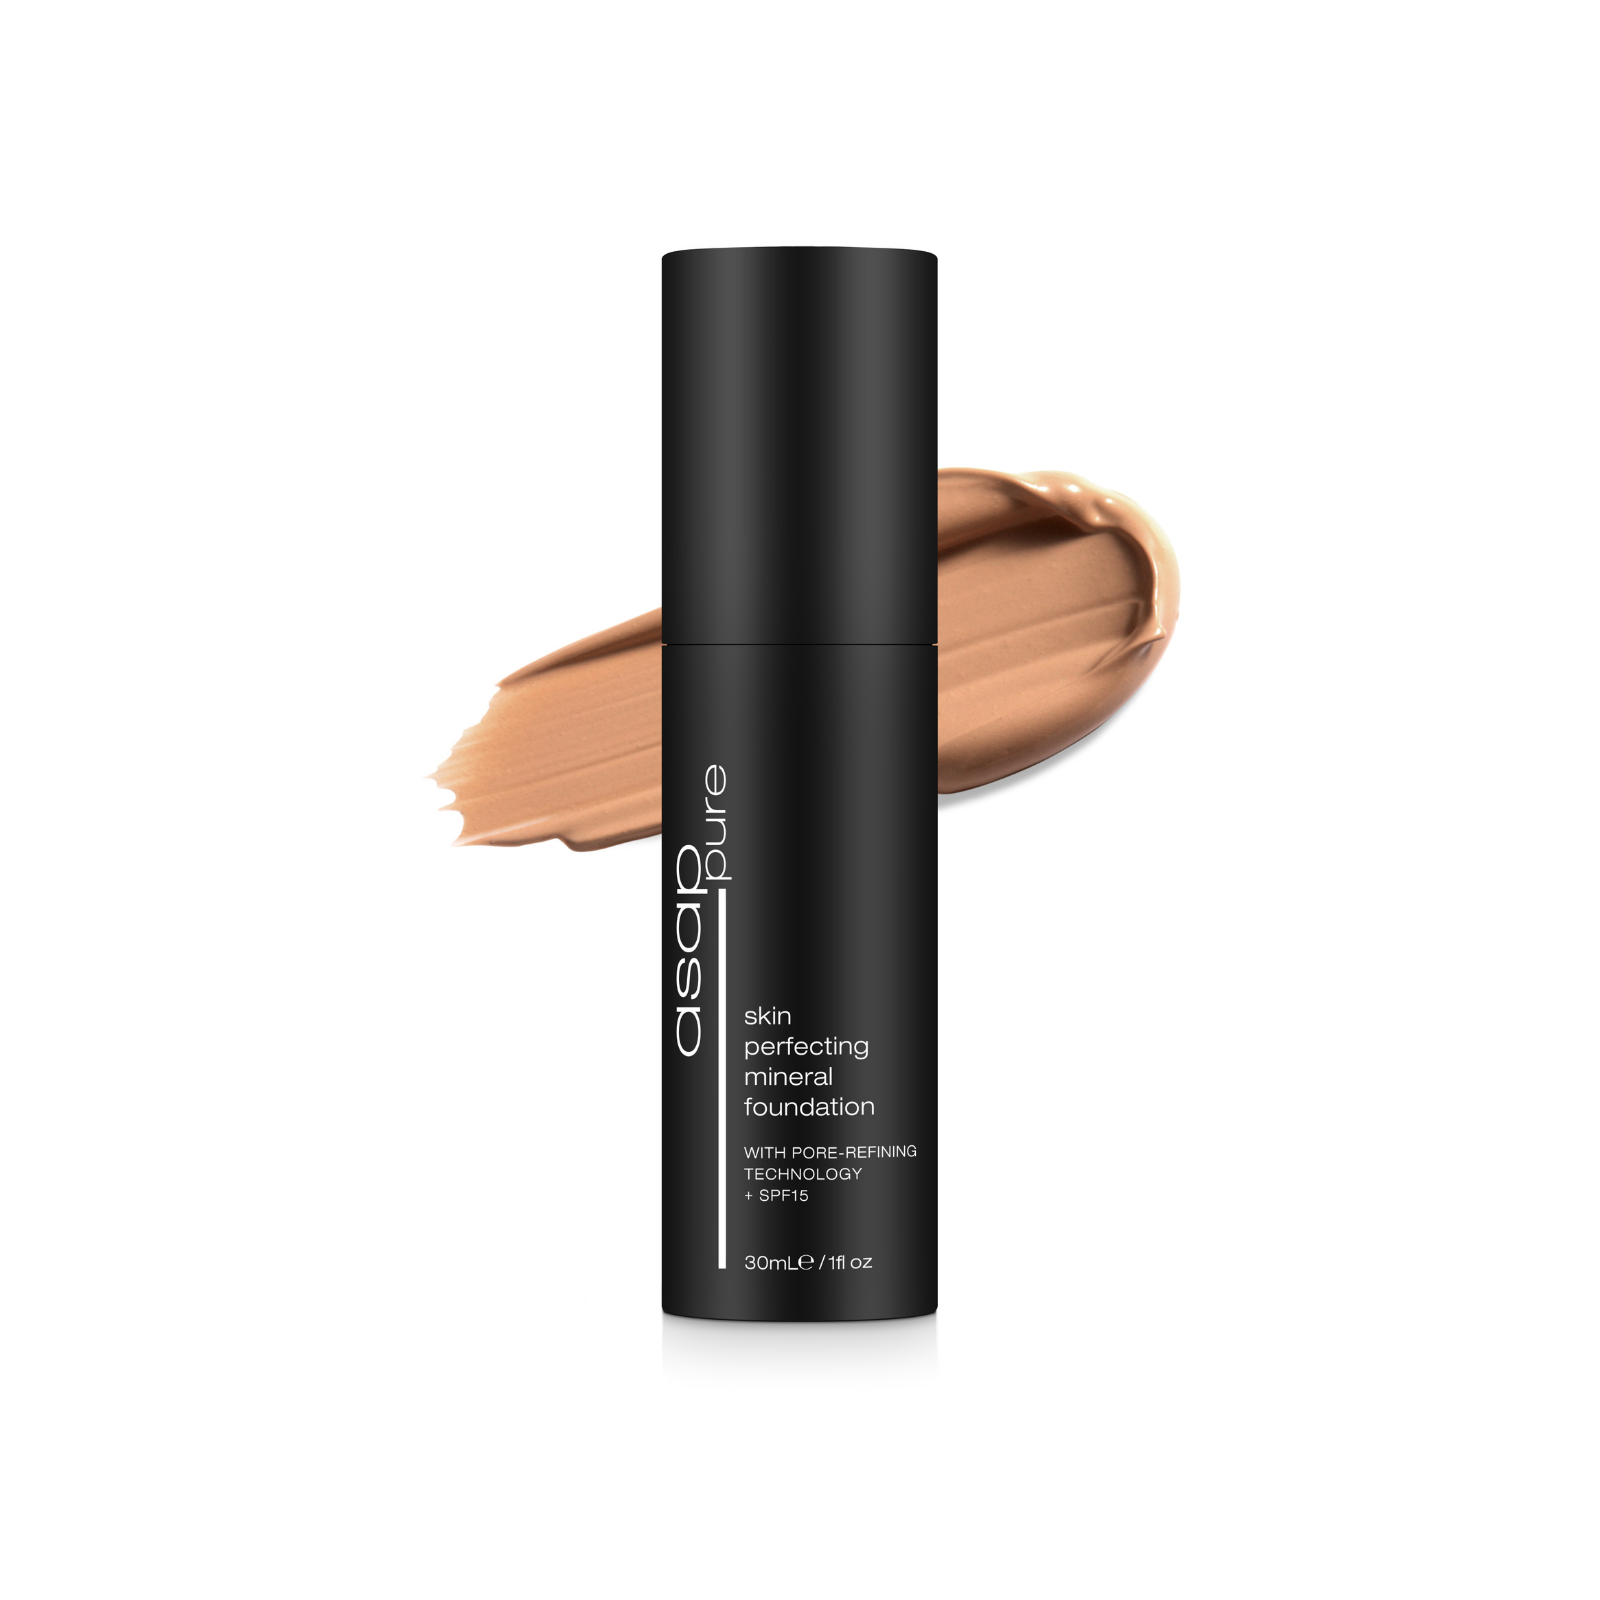 ASAP Skin Perfecting Mineral Foundation with Pore-Refining Technology + SPF15 - Warm Four 30ml